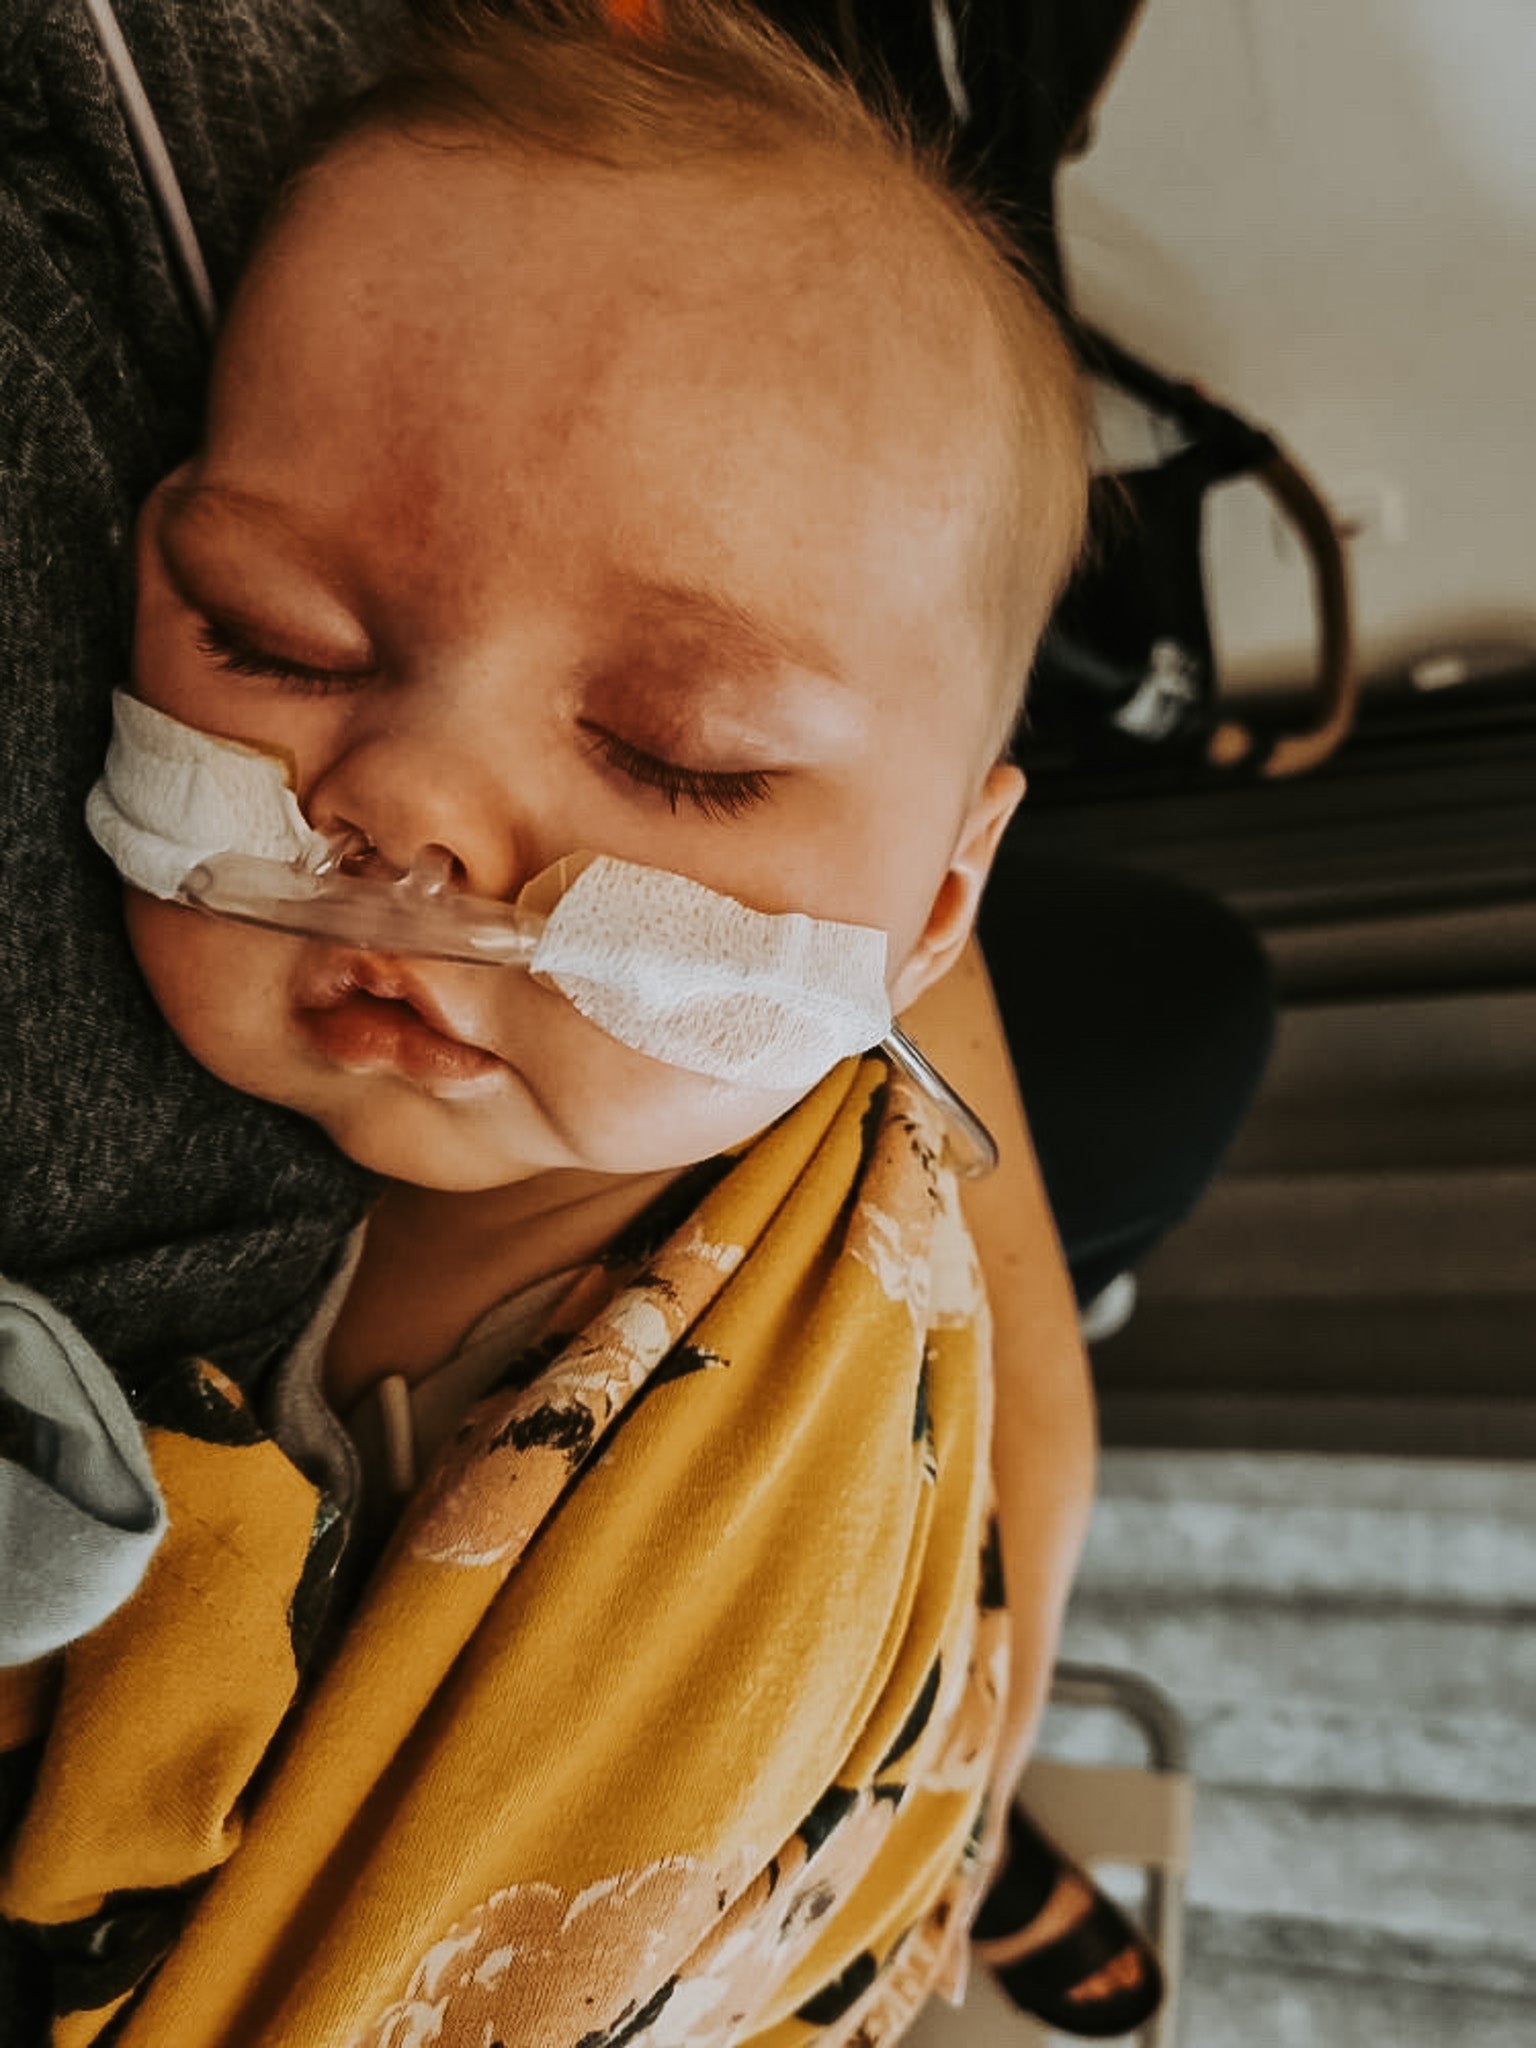 Looking After A Child With RSV At Home